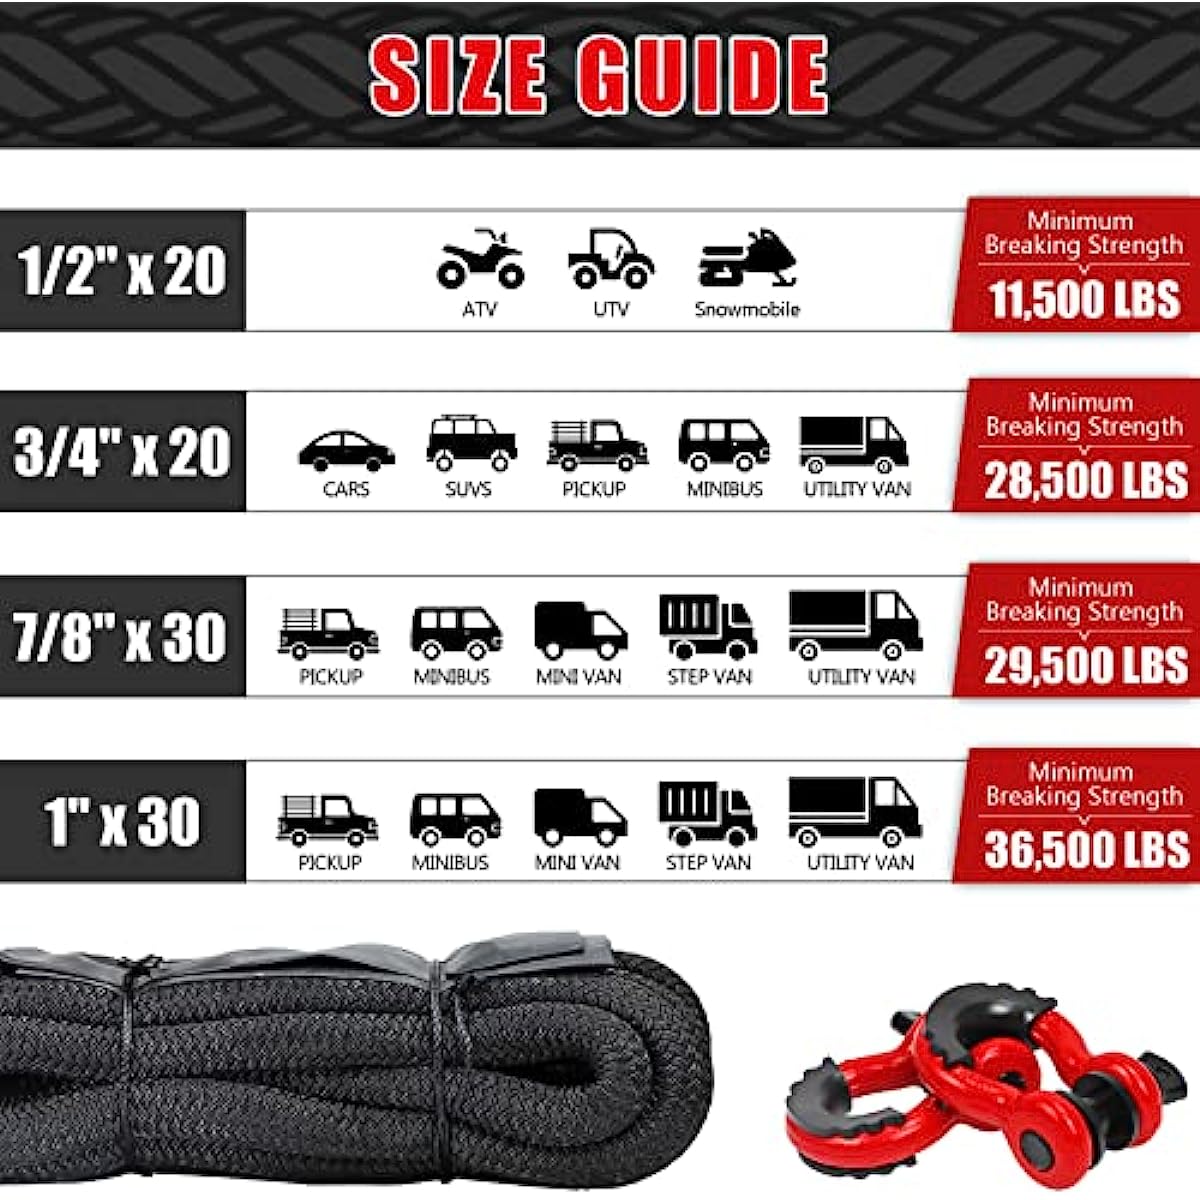 Hemdre 1"×30' Kinetic Recovery Tow Rope & Tow Rope(36,500lbs), with 2 D-Ring